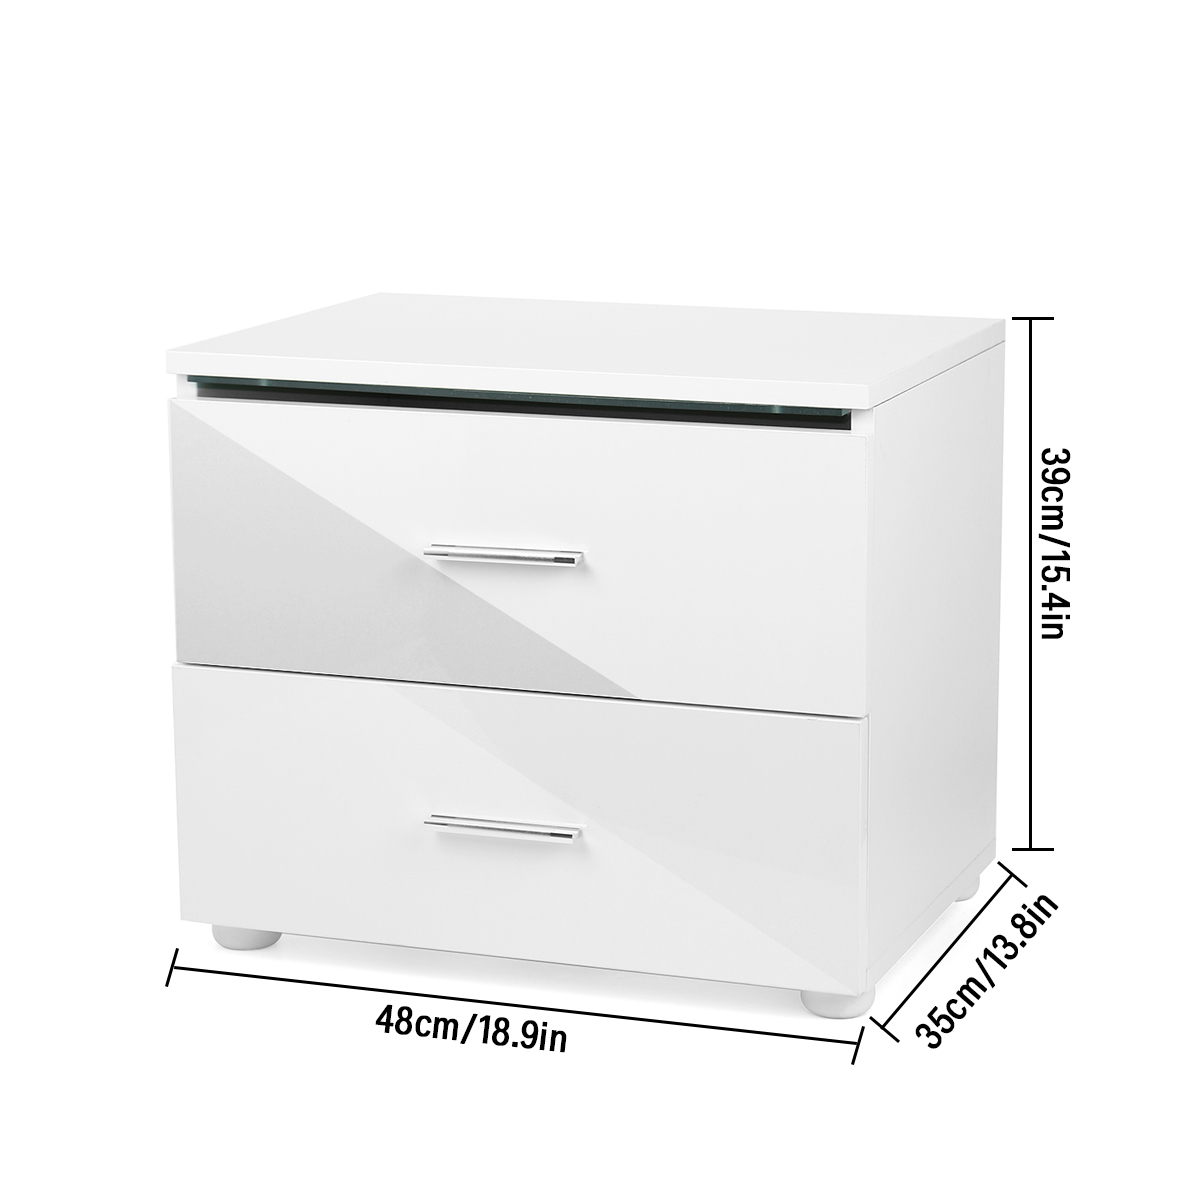 Hommpa Modern High Gloss LED Nightstand with 2 Drawers White Bedside Table with LED Light Handle Small End Side Table for Bedroom Living Room Furniture 18.9x13.8x15.4 inch - image 3 of 11